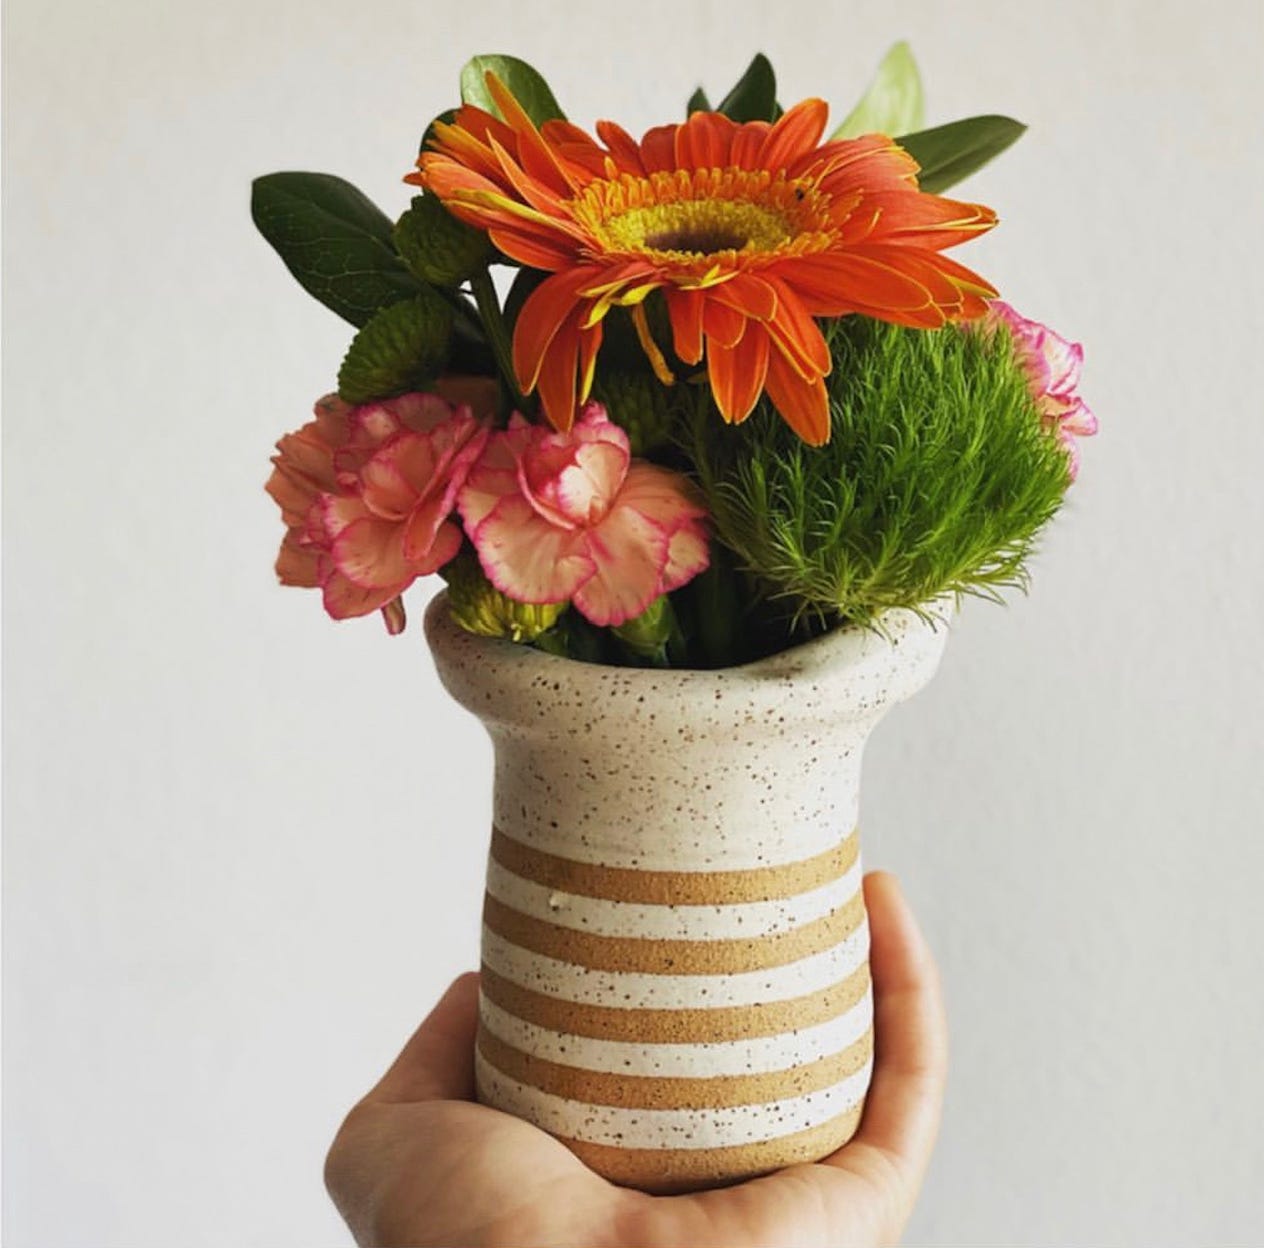 Small narrow flower pot made by Dr. Camacho. The flower pot is cream with light brown stripes at the base. The flower pot is holding a small colorful mix of flowers.